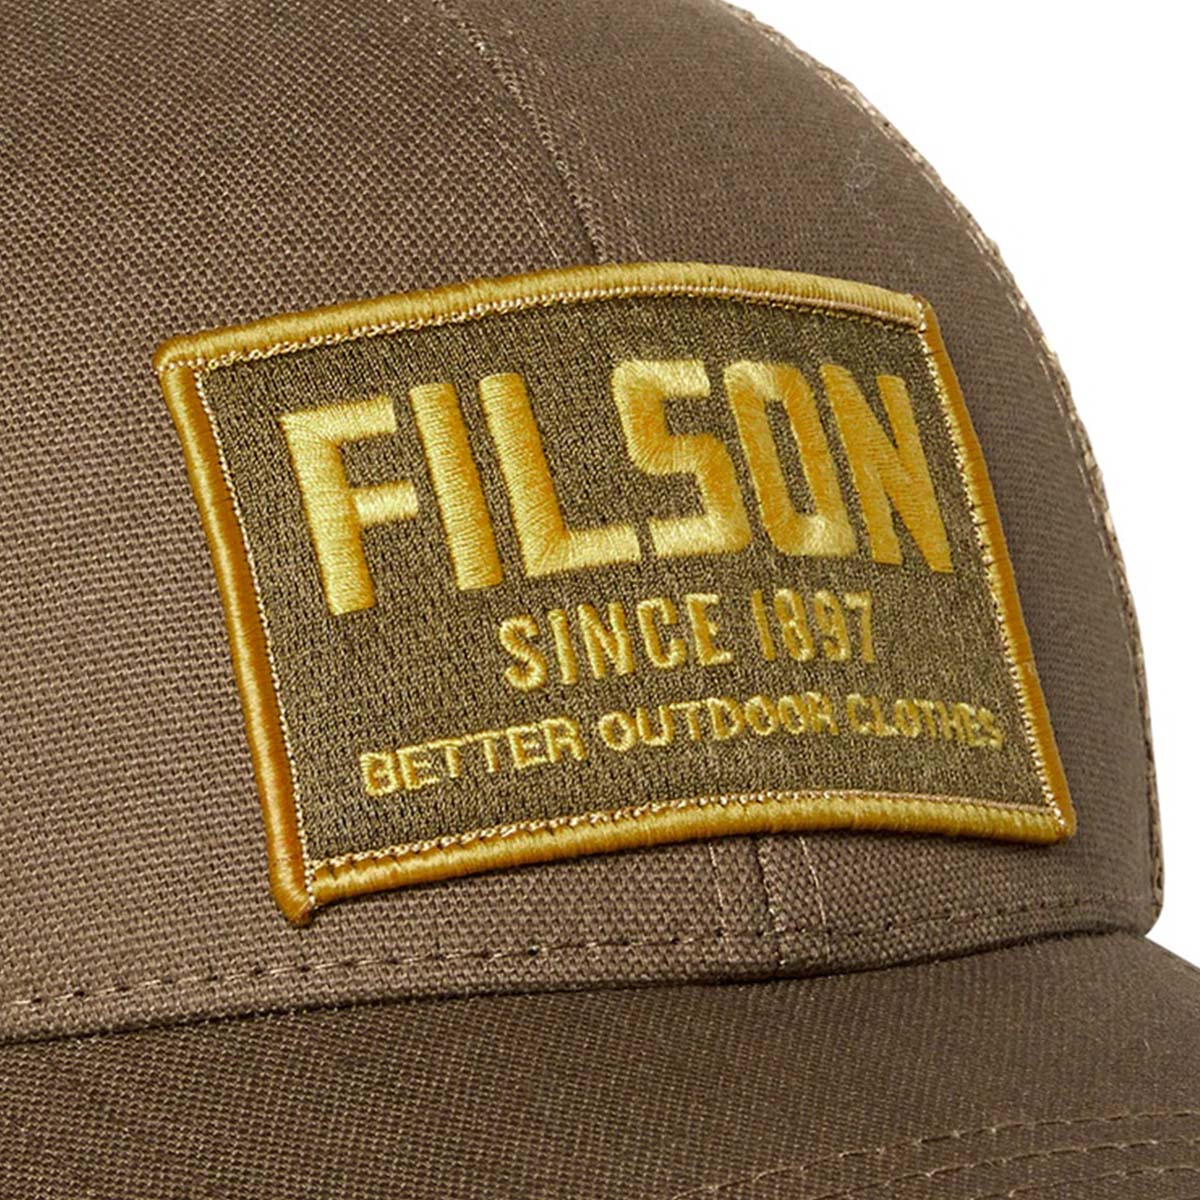 Filson Mesh Snap-Back Logger Cap 20204528-Tobacco/Base Camp, durable cap with breathable sun protection